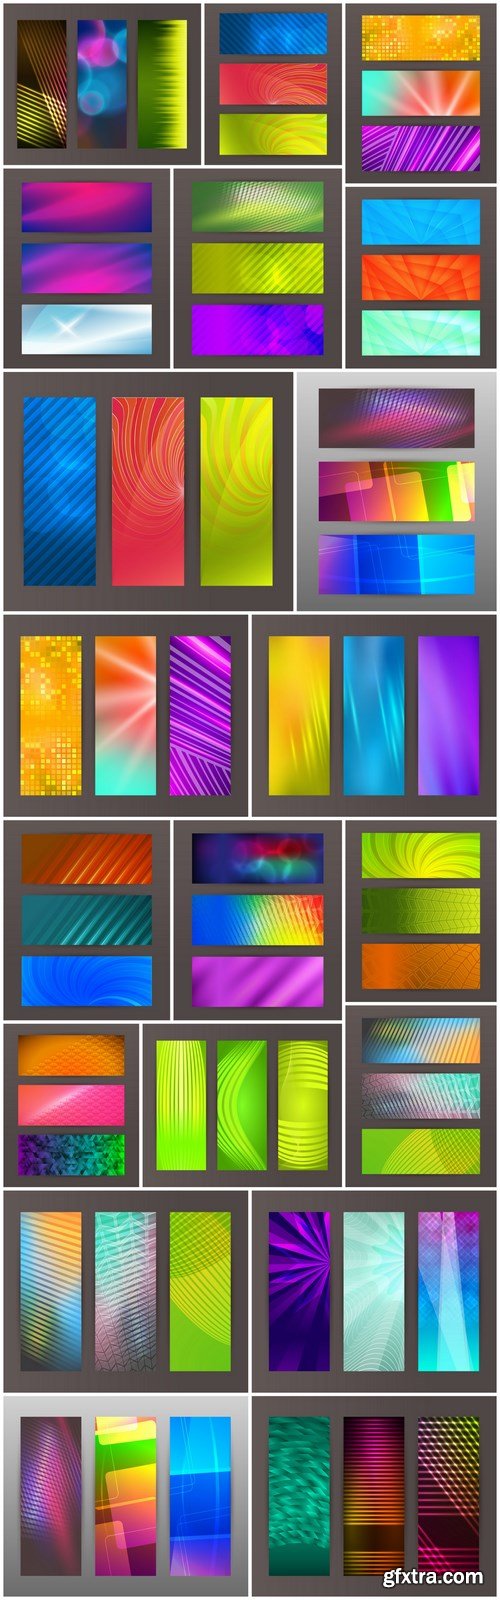 Abstract Banners Collection #135 - 20 Vectors